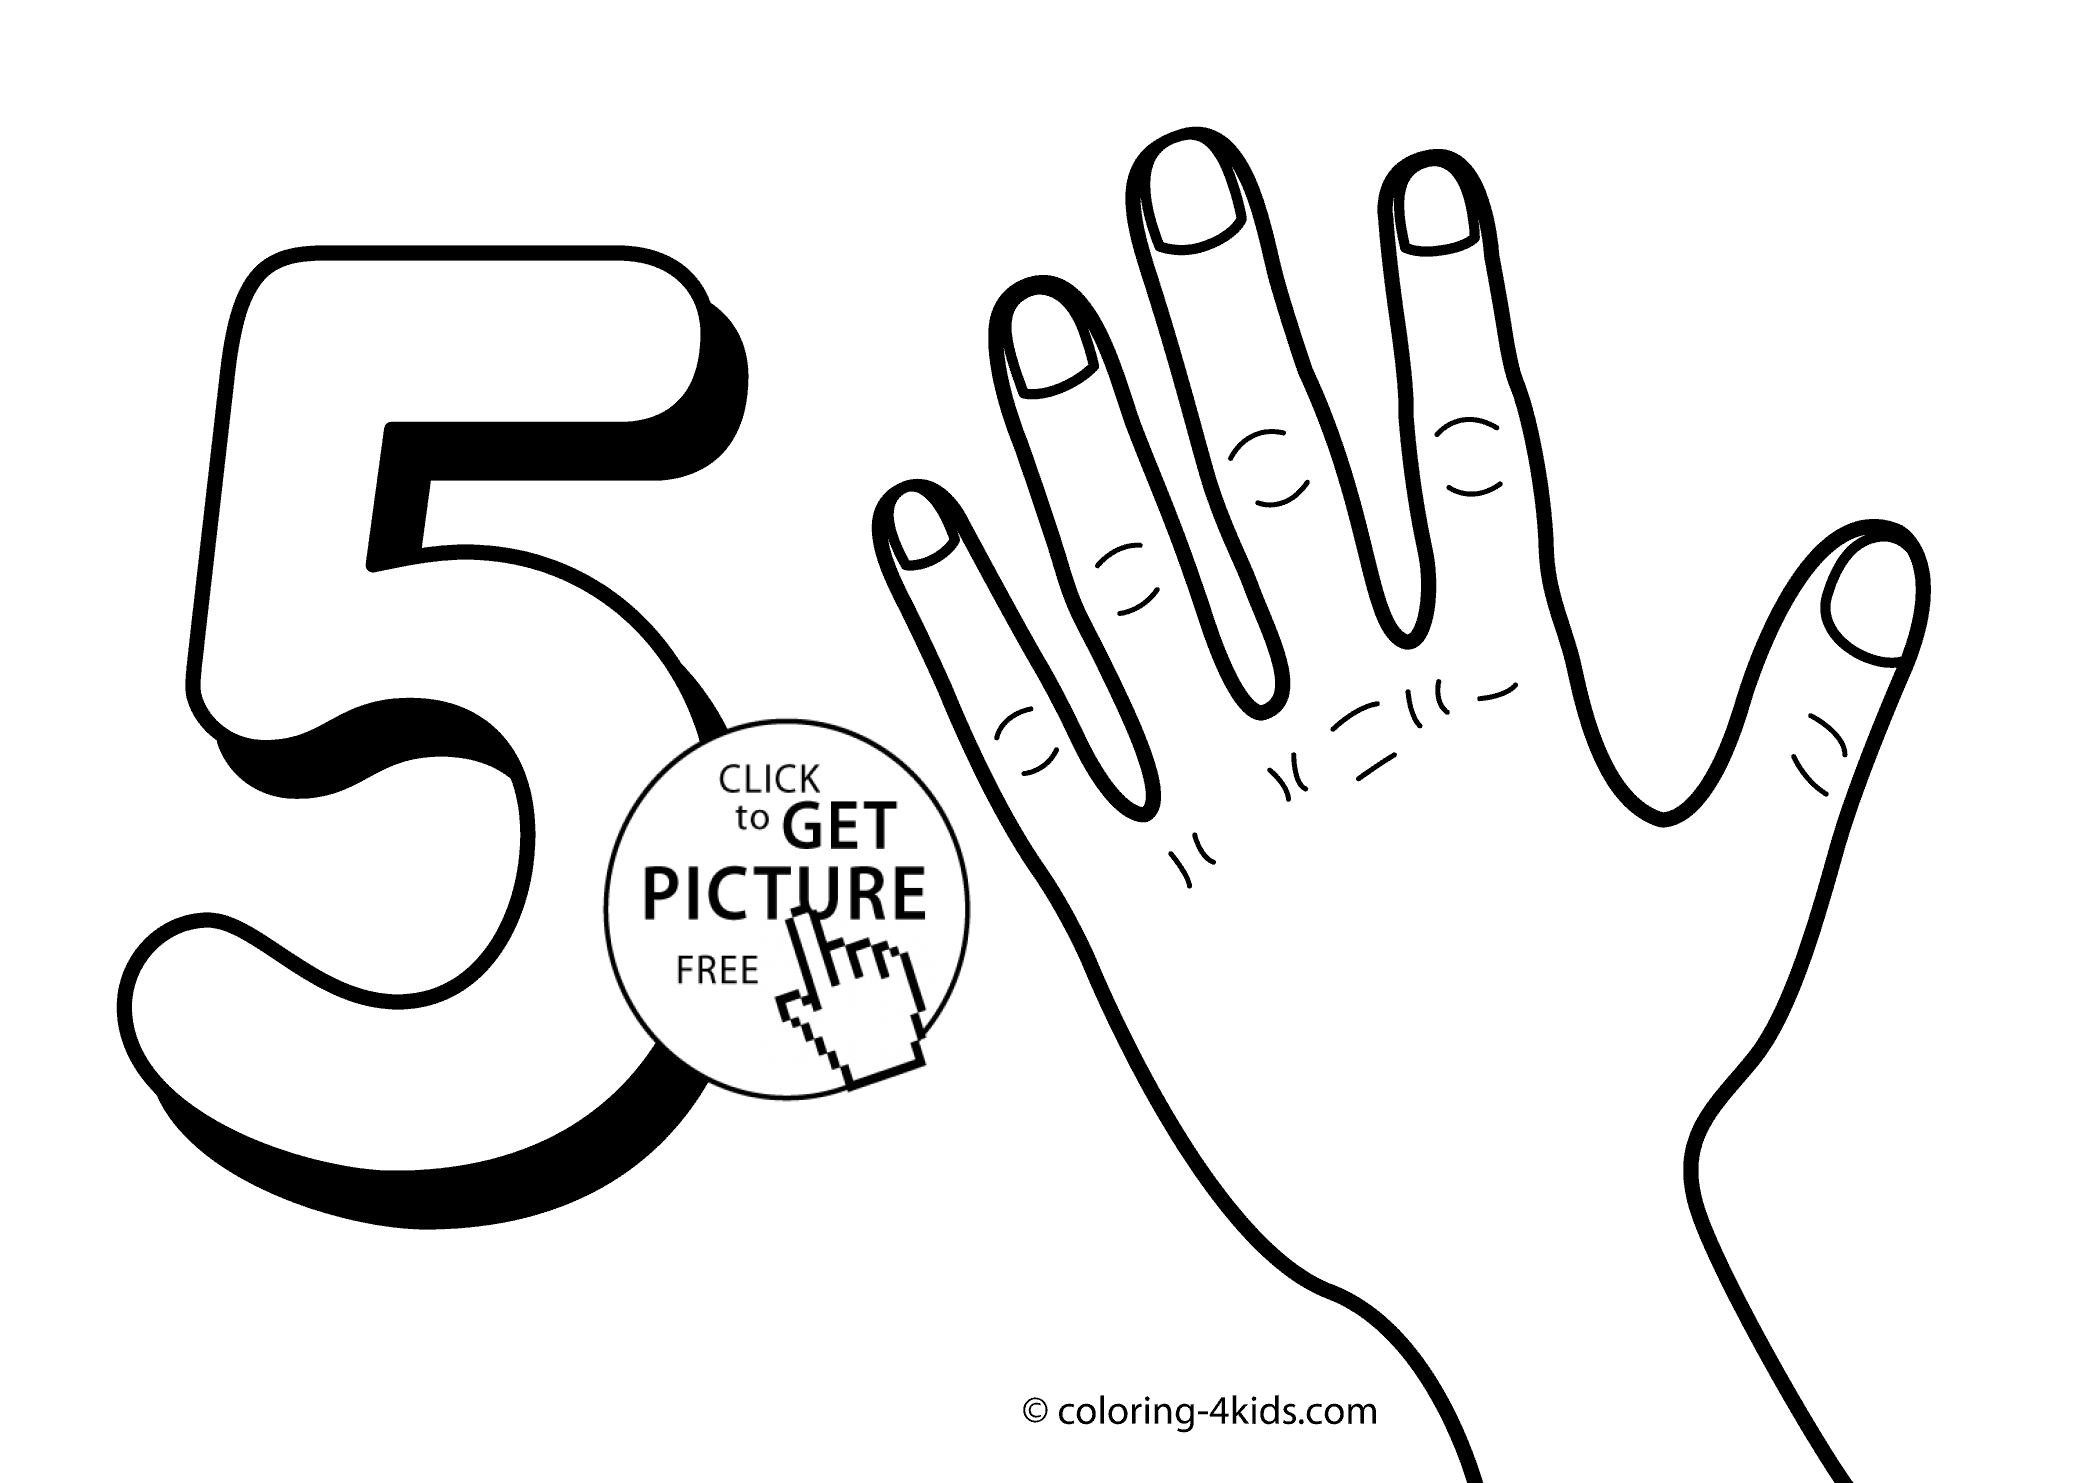 Numbers Coloring Page Coloring Pages For Kids To Print Out Numbers With 5 Numbers Coloring